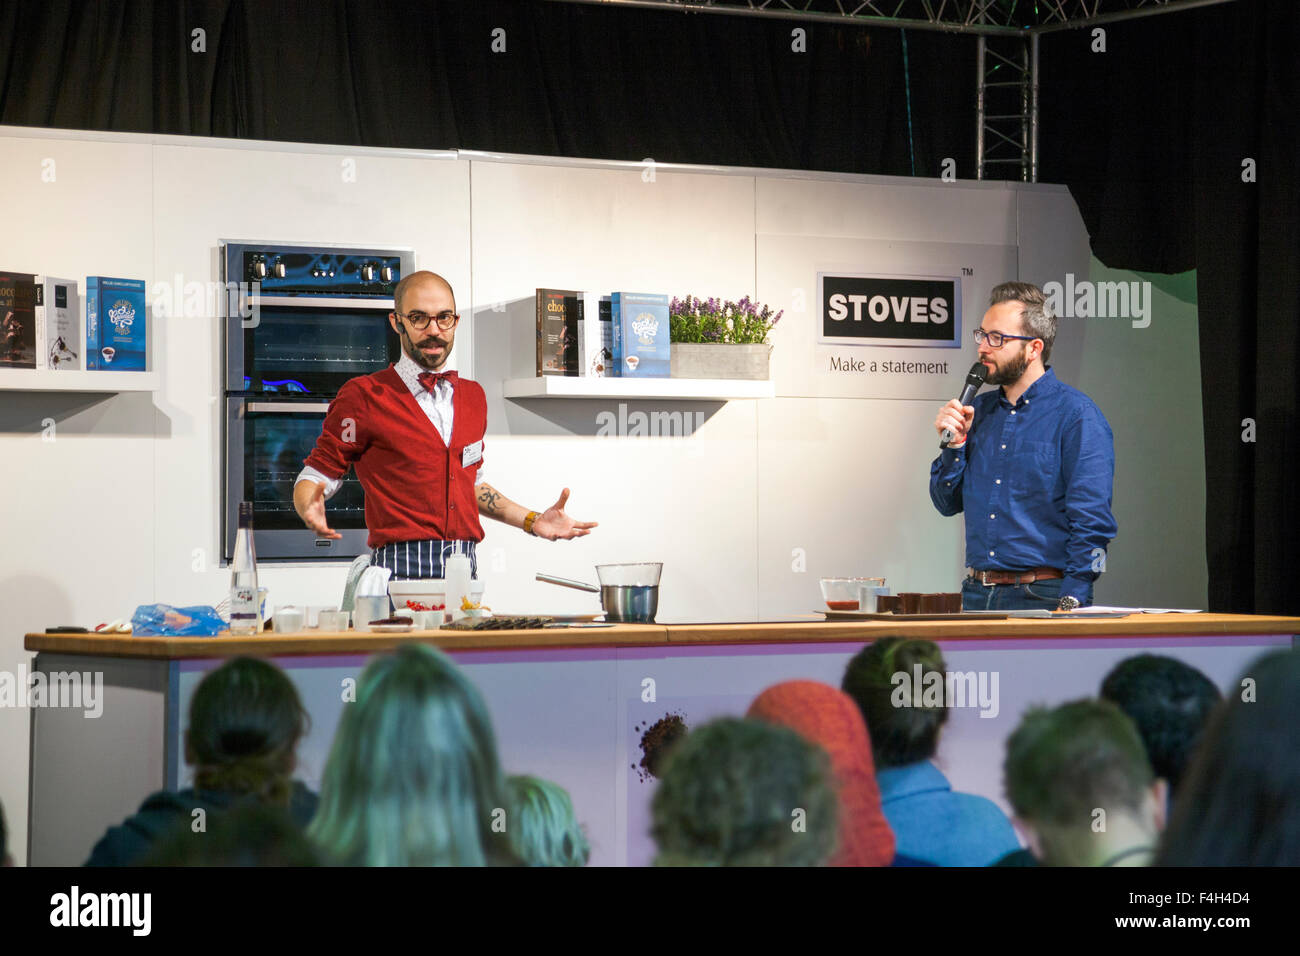 London, UK. 18th October 2015 - Tony Rodd, Masterchef finalist, creating a Black Forest dessert in front of live audience. International specialists from the chocolate industry gather at Olympia Hall to exhibit at the annual Chocolate Show in London, UK’s largest chocolate event. Activities include workshops, presentations by famous chefs, demonstrations and a chocolate fashion show. Credit: Nathaniel Noir/Alamy Live News Stock Photo